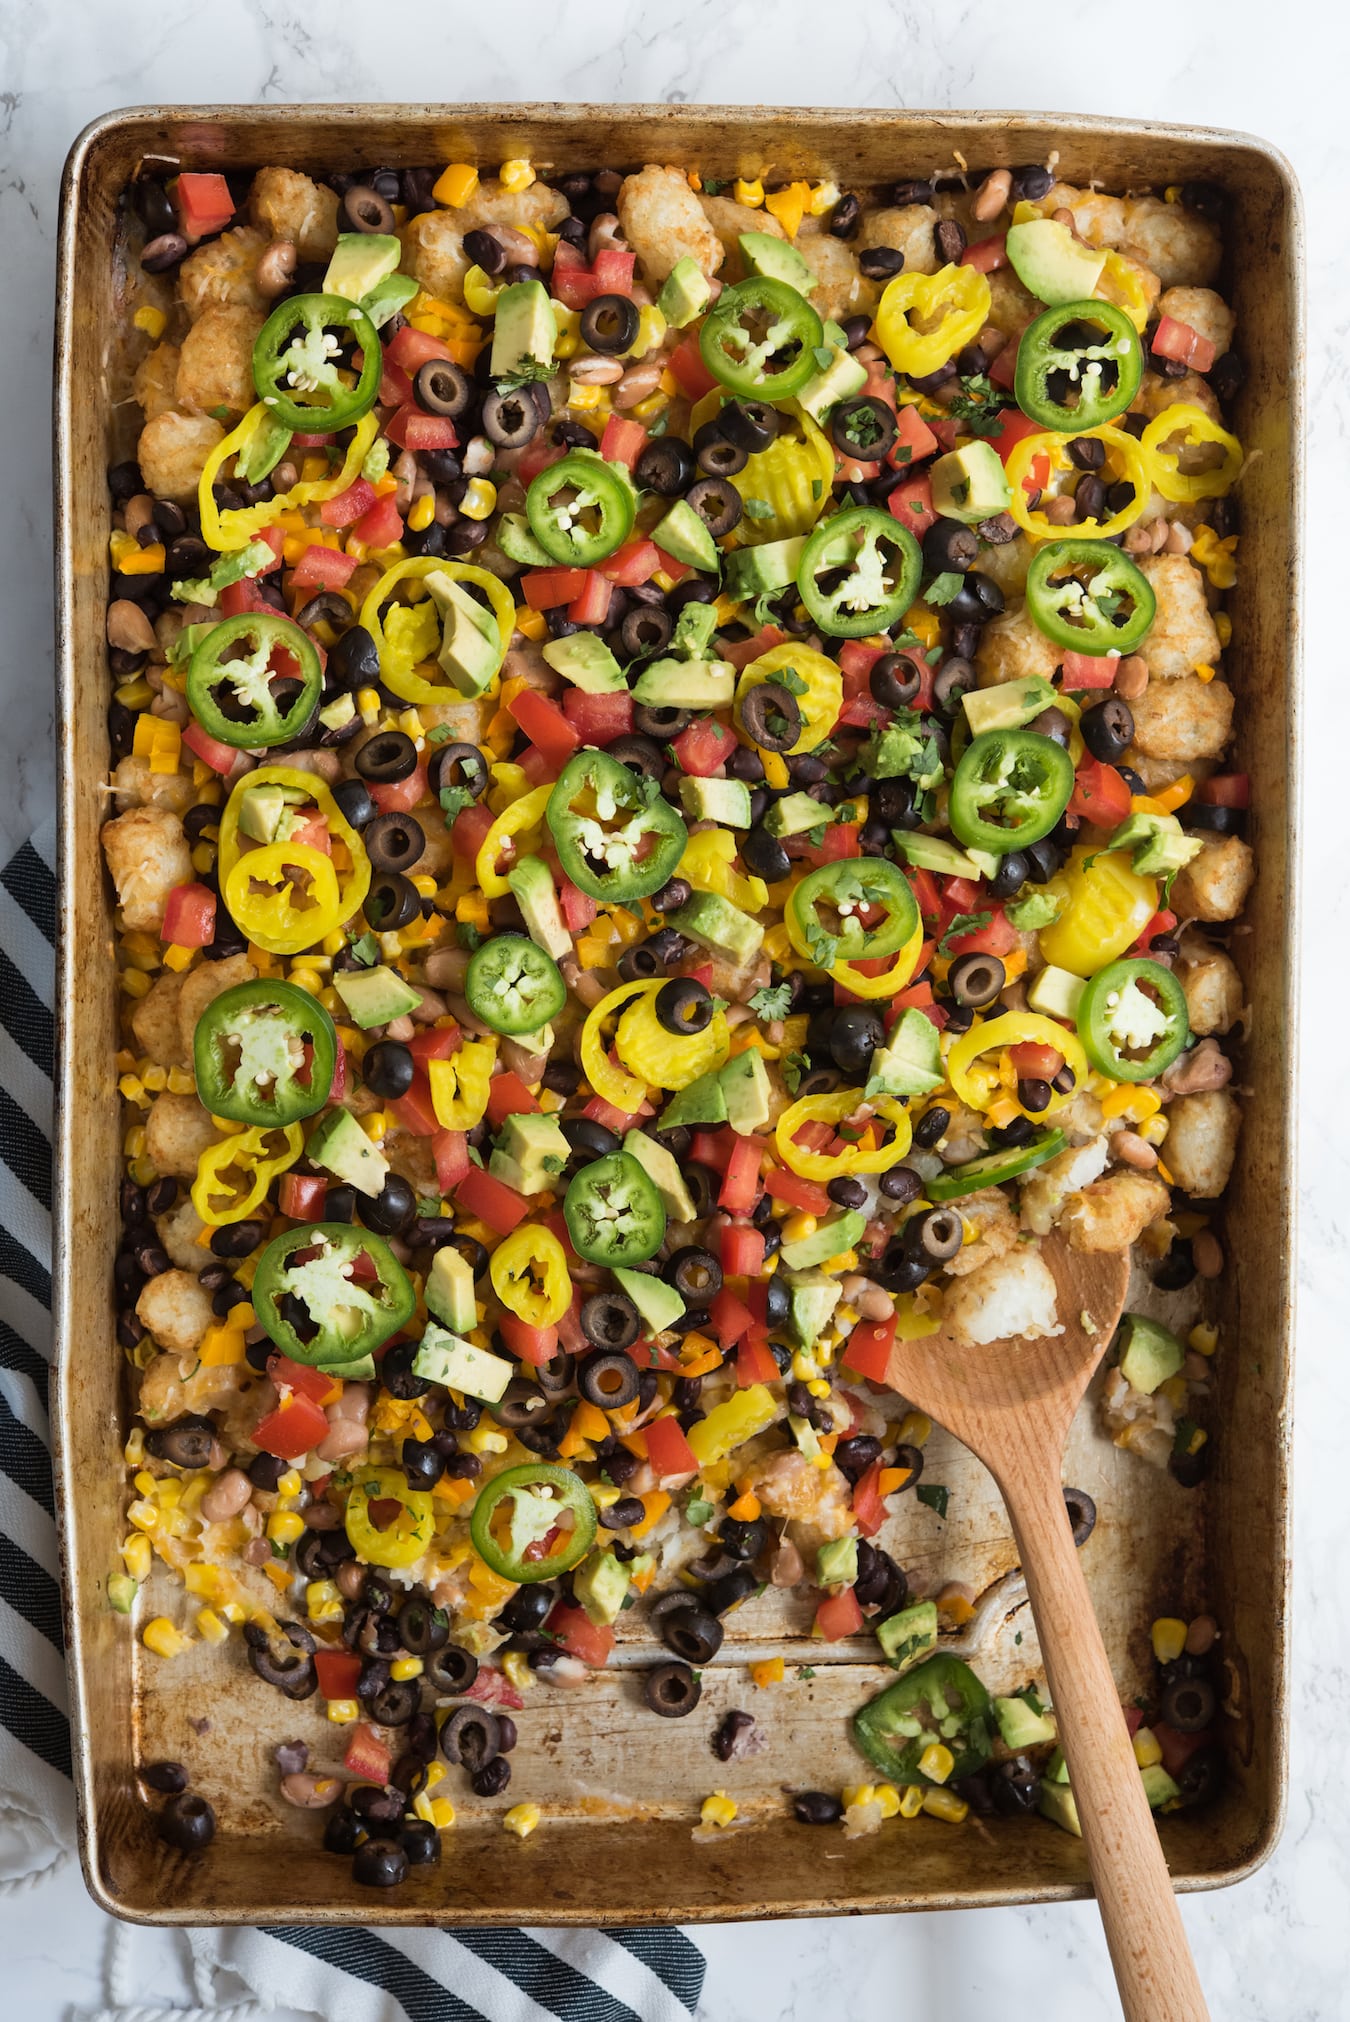 Easy game day recipes - loaded tater tot nachos from @cydconverse!